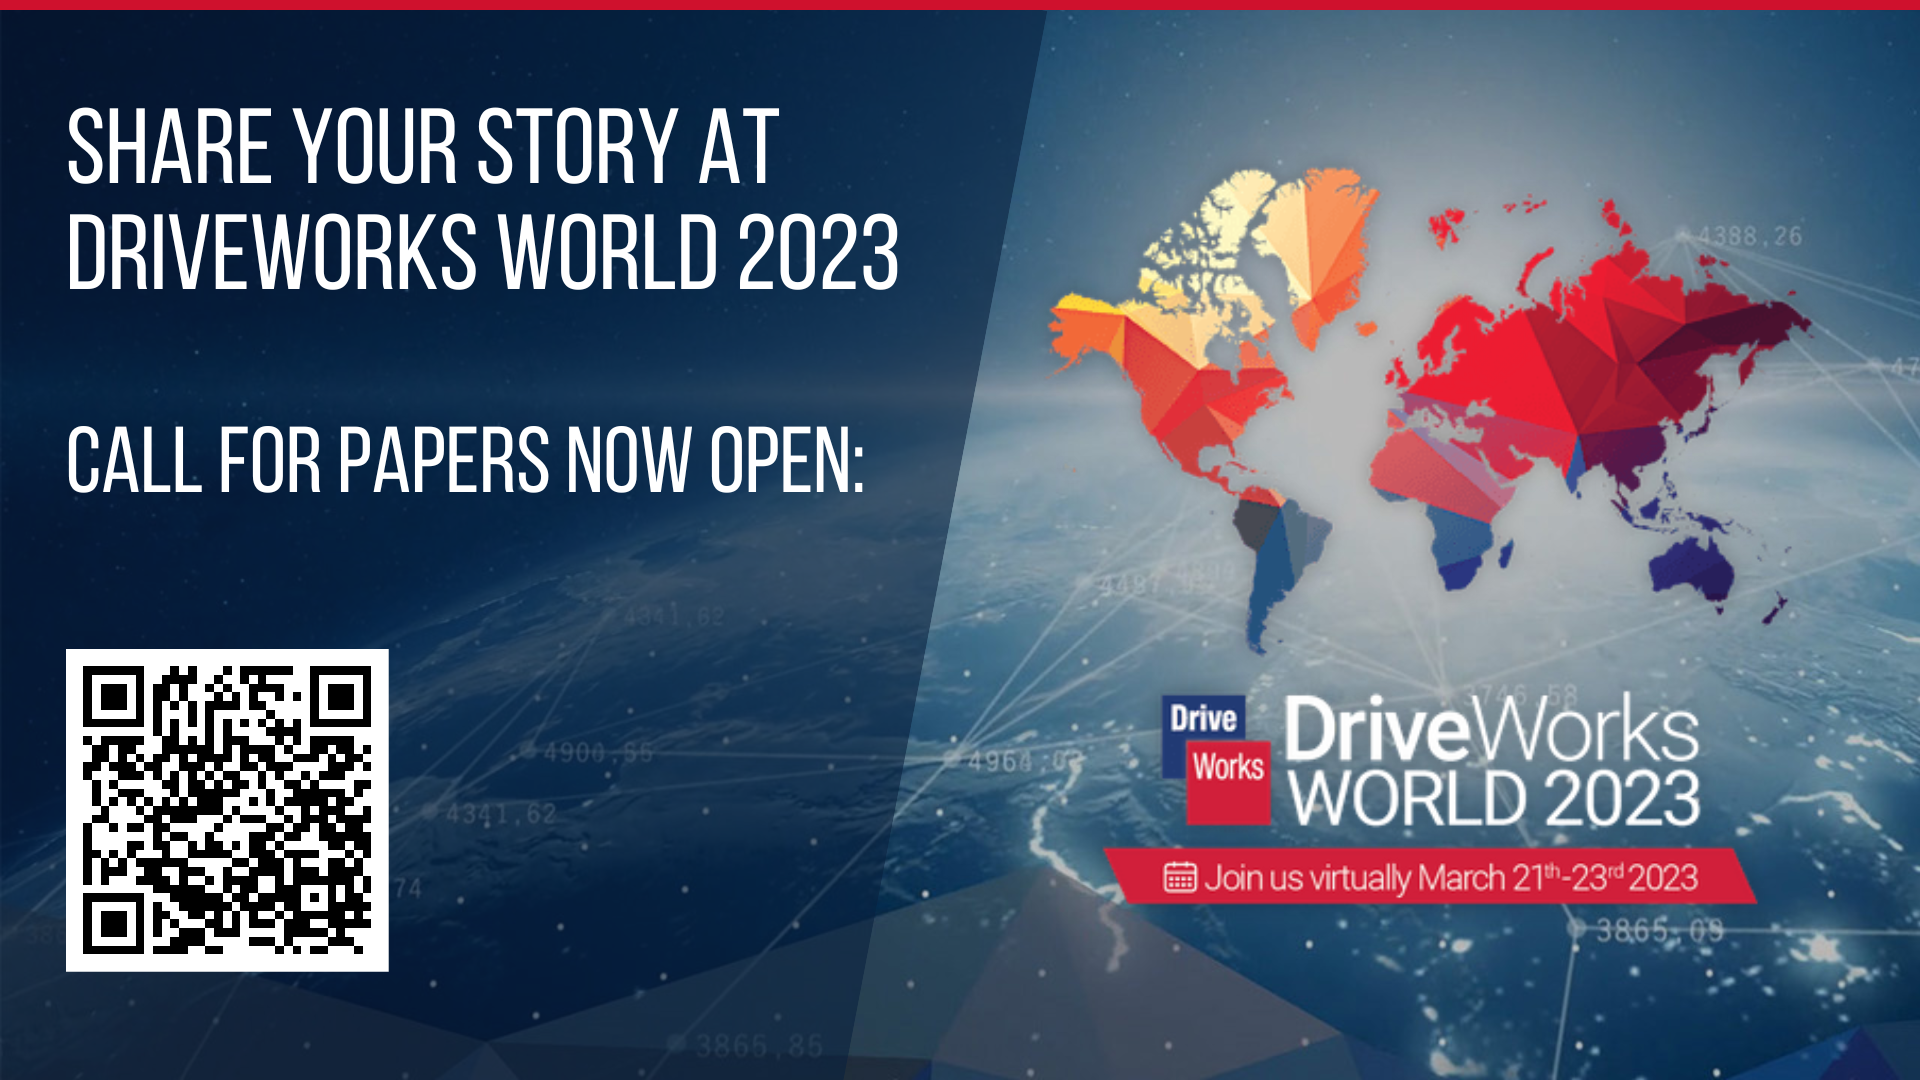 Graphic - share your story at DriveWorks World 2023. Includes a QR code to scan to complete the call for papers.